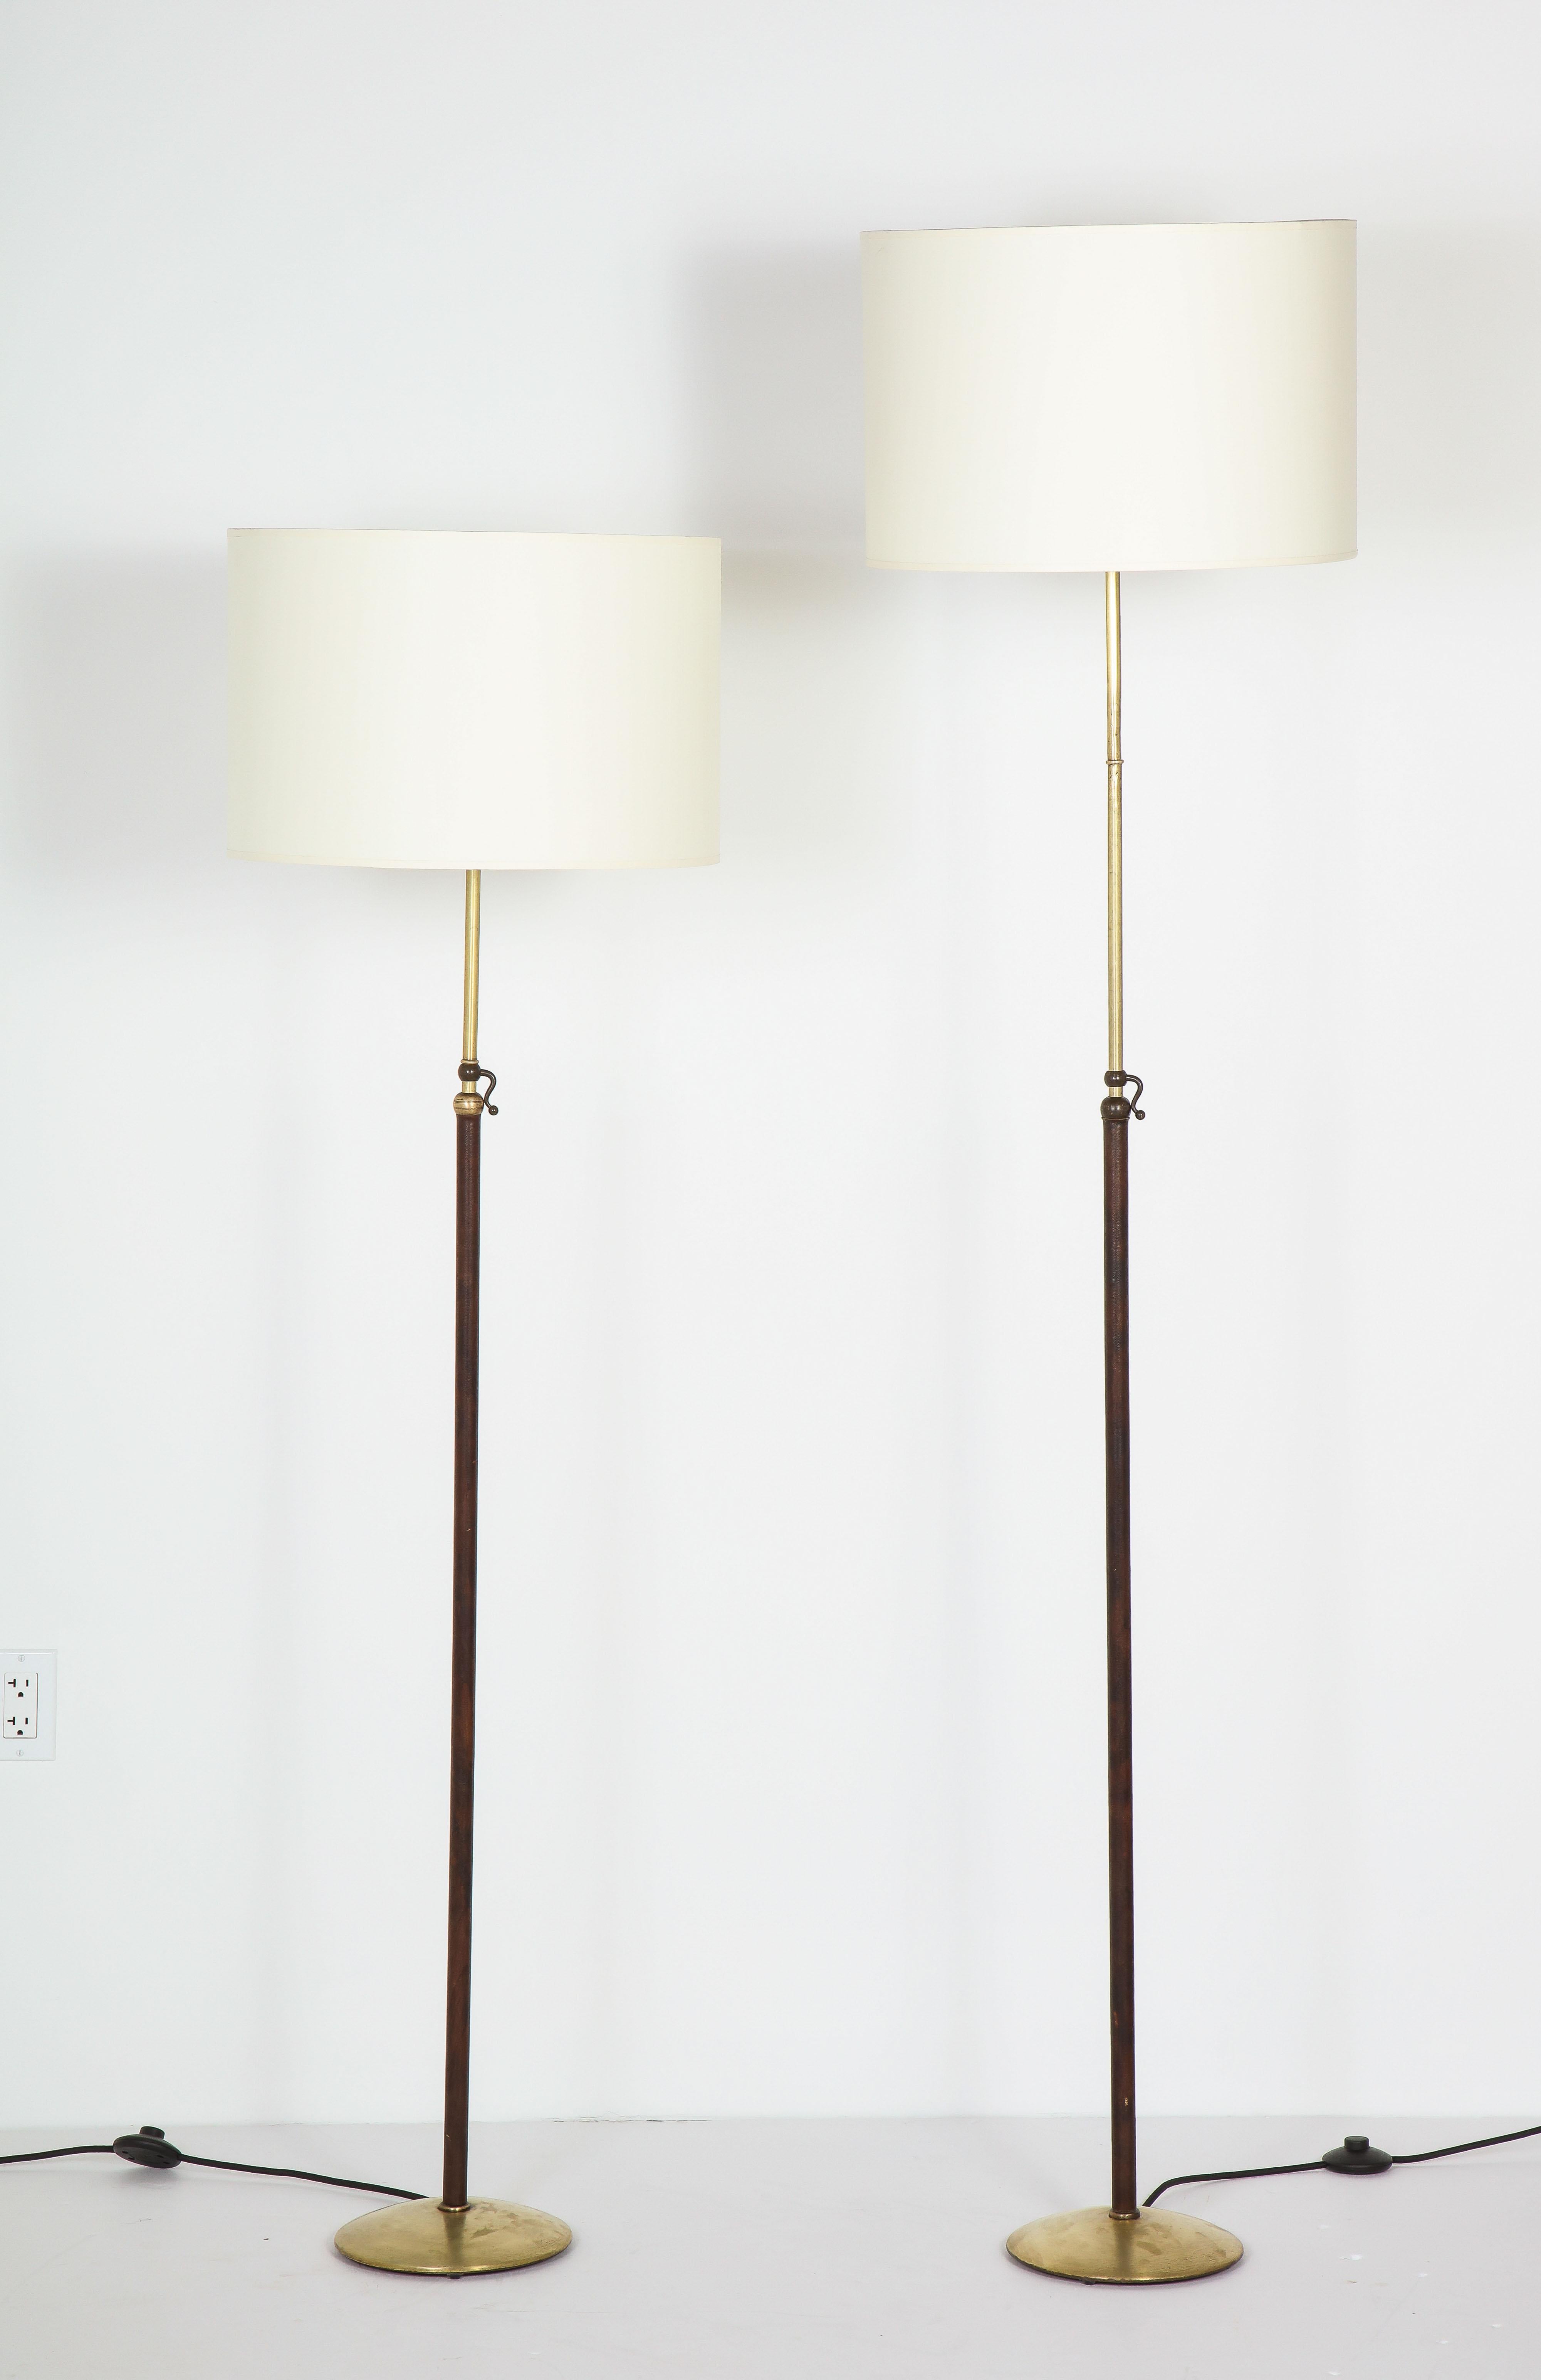 French Pair of Adjustable Floor Lamps by Jacques Adnet For Sale